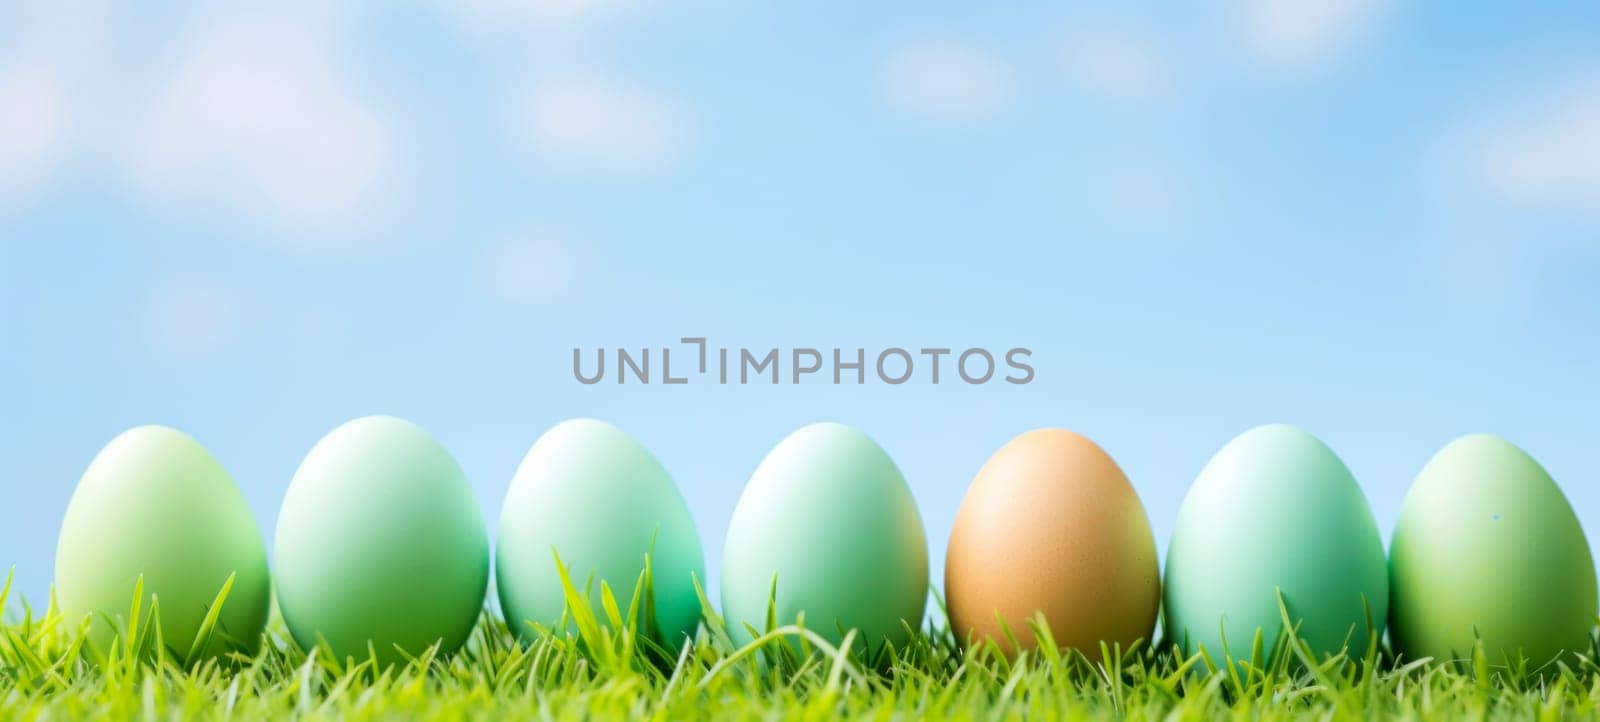 Colorful Easter Eggs Lined Up on Sunny Grass by andreyz